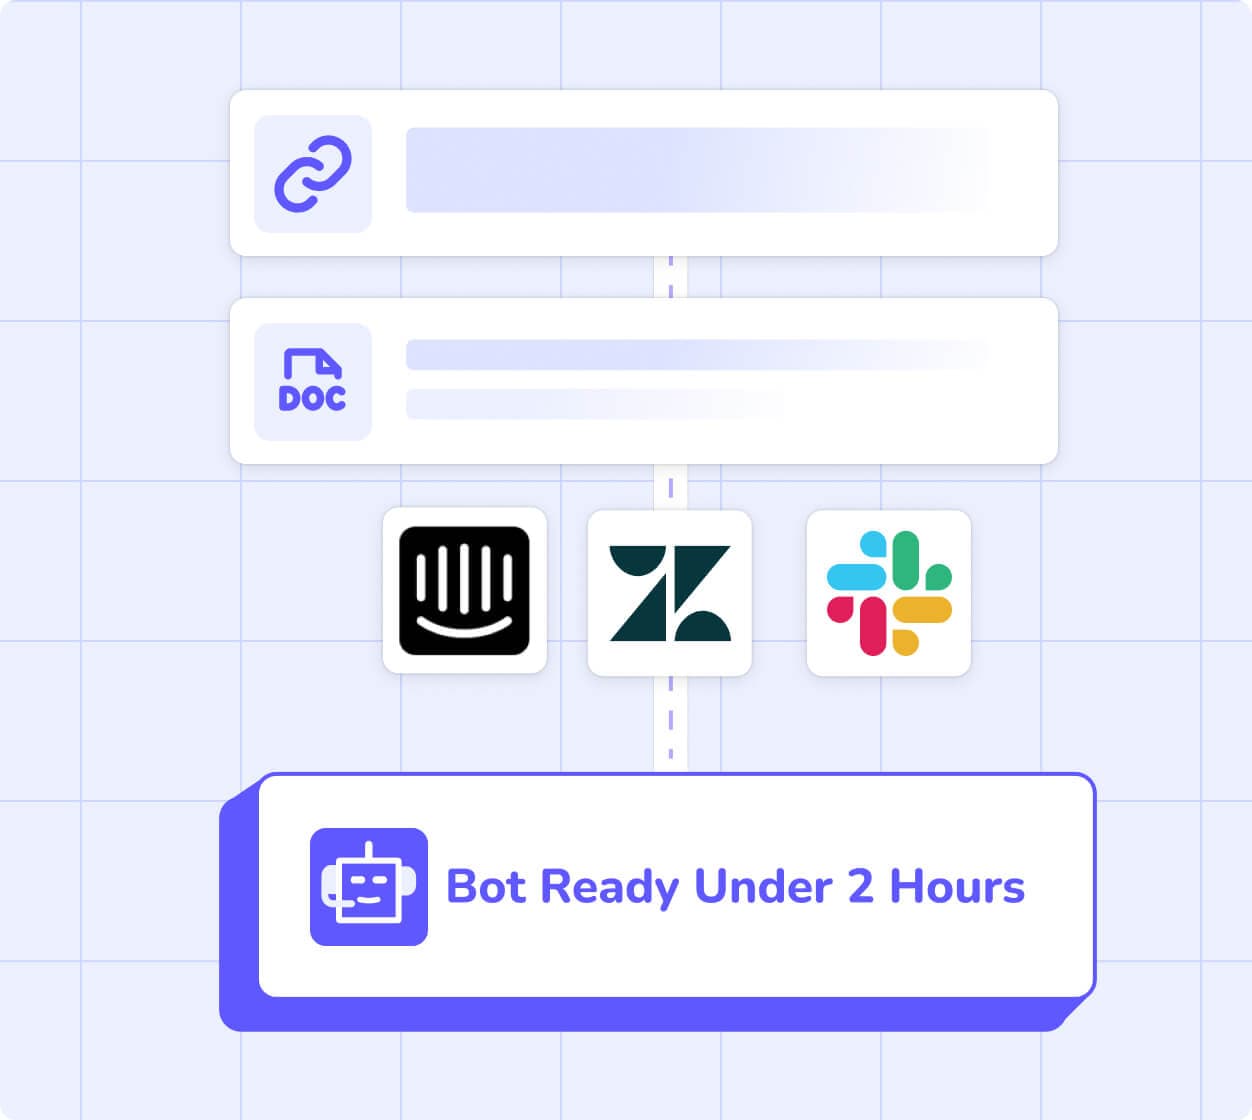 Bot ready under 2 hours